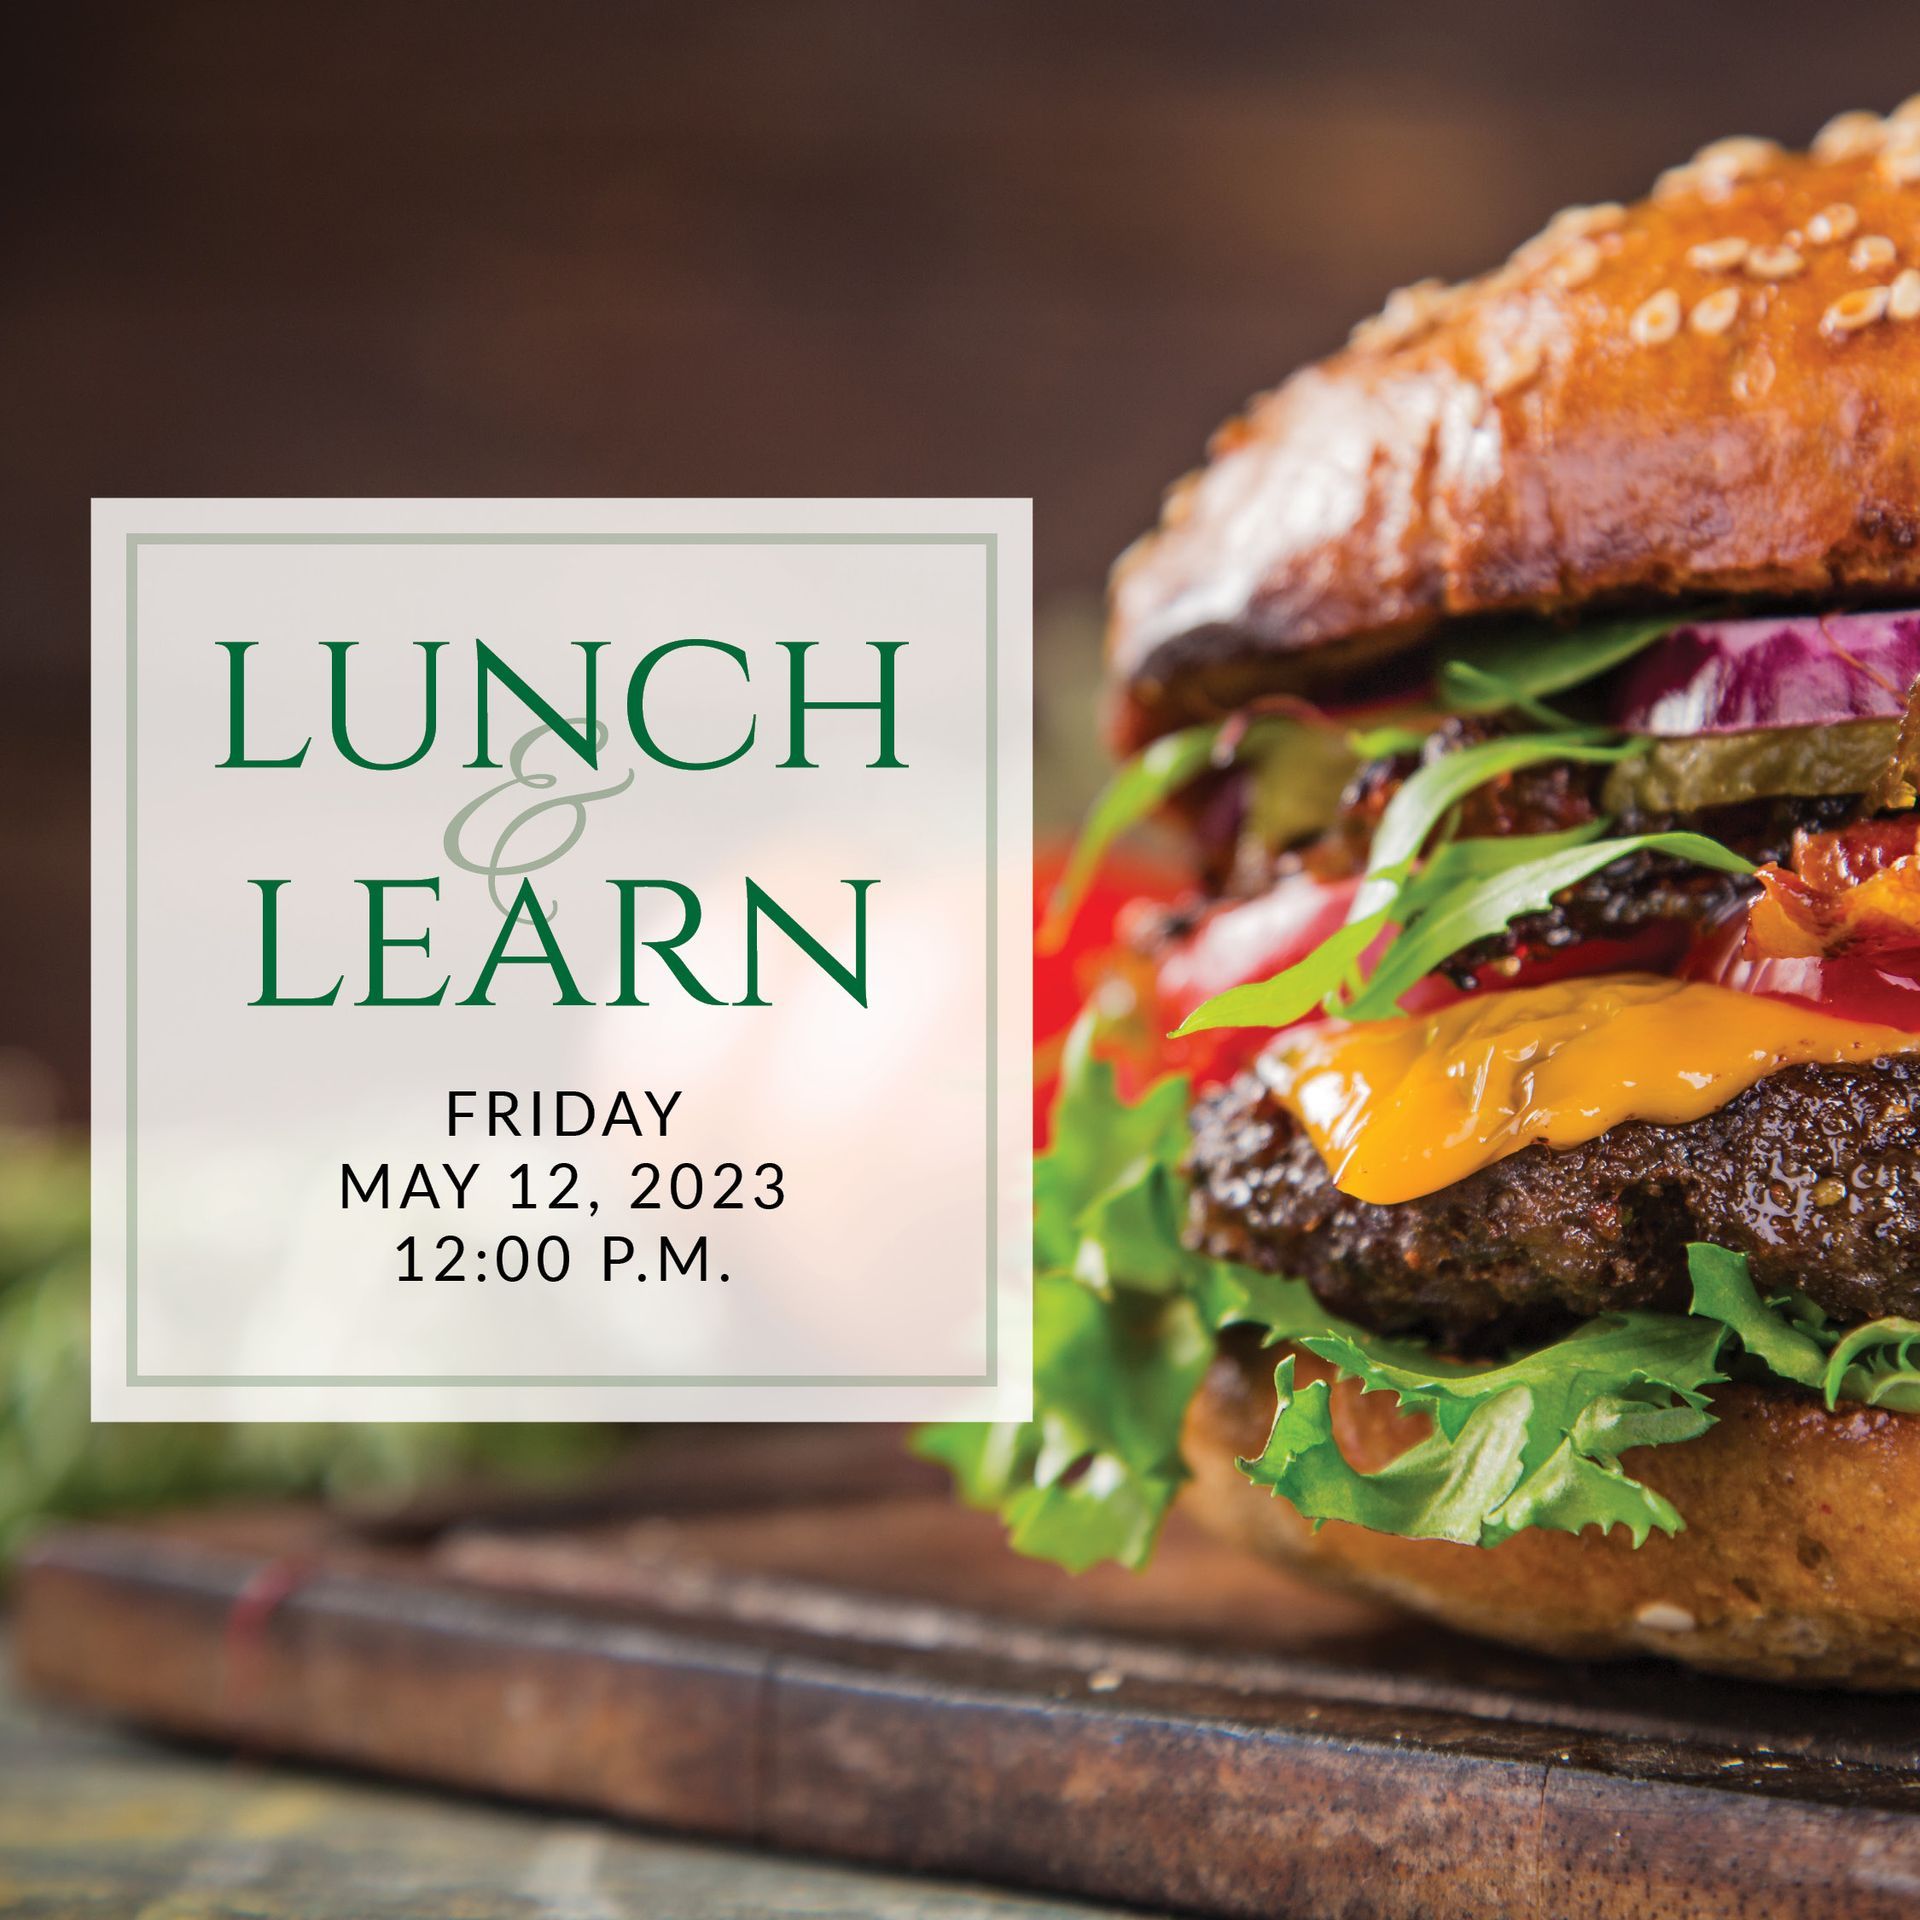 an advertisement for lunch and learn on friday may 12th